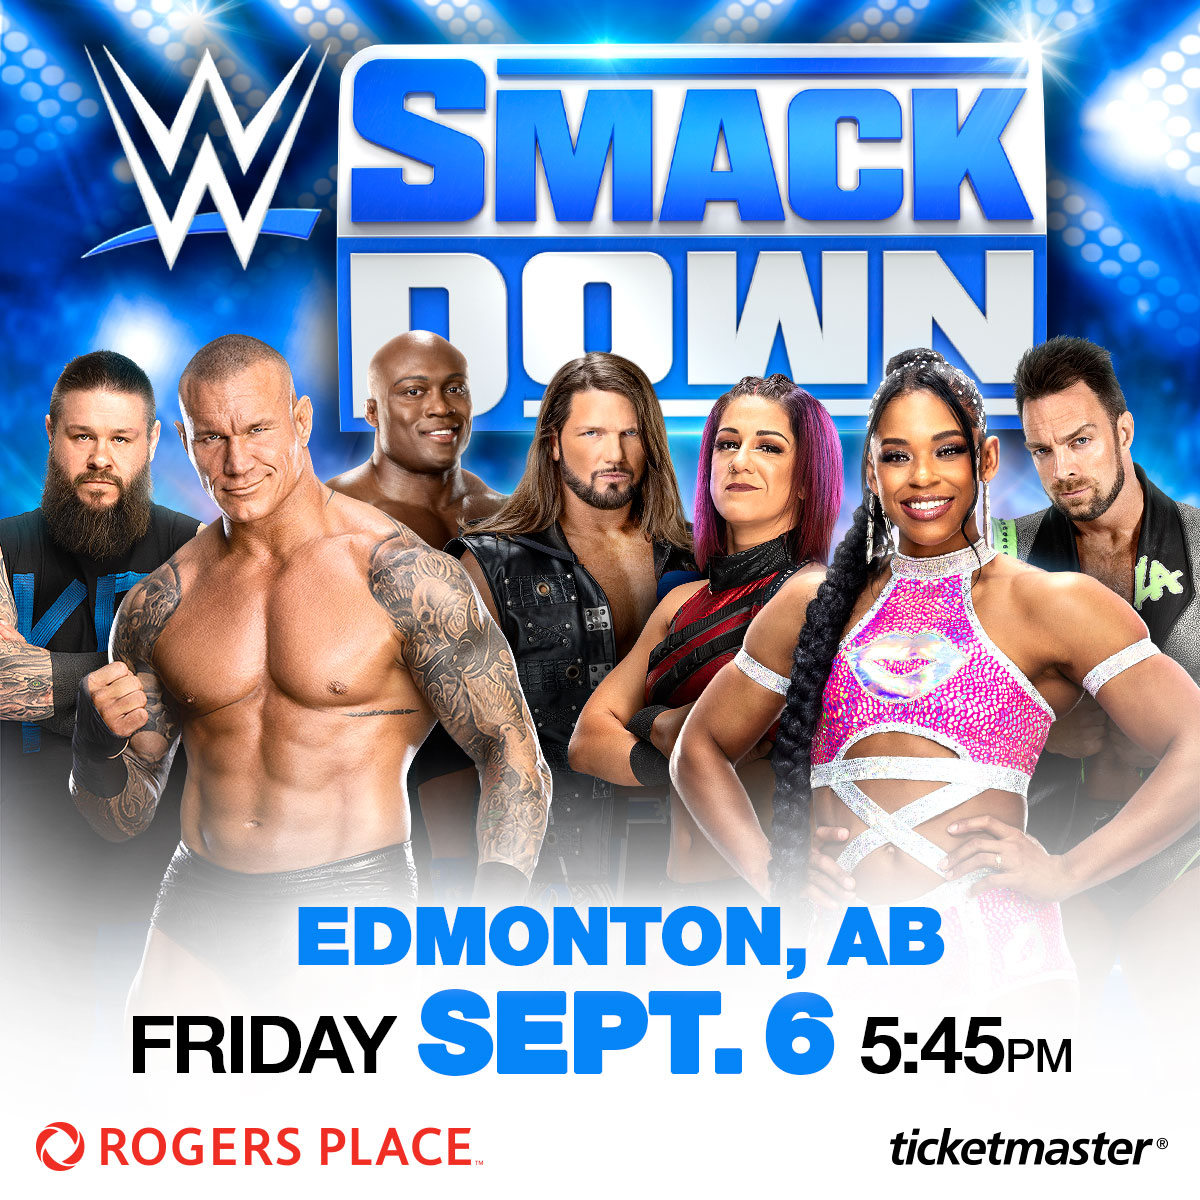 🔥🔥🔥 Tickets are on sale NOW to see @WWE SmackDown at #RogersPlace on Friday, September 6!! More info/tickets: RogersPlace.com/WWE